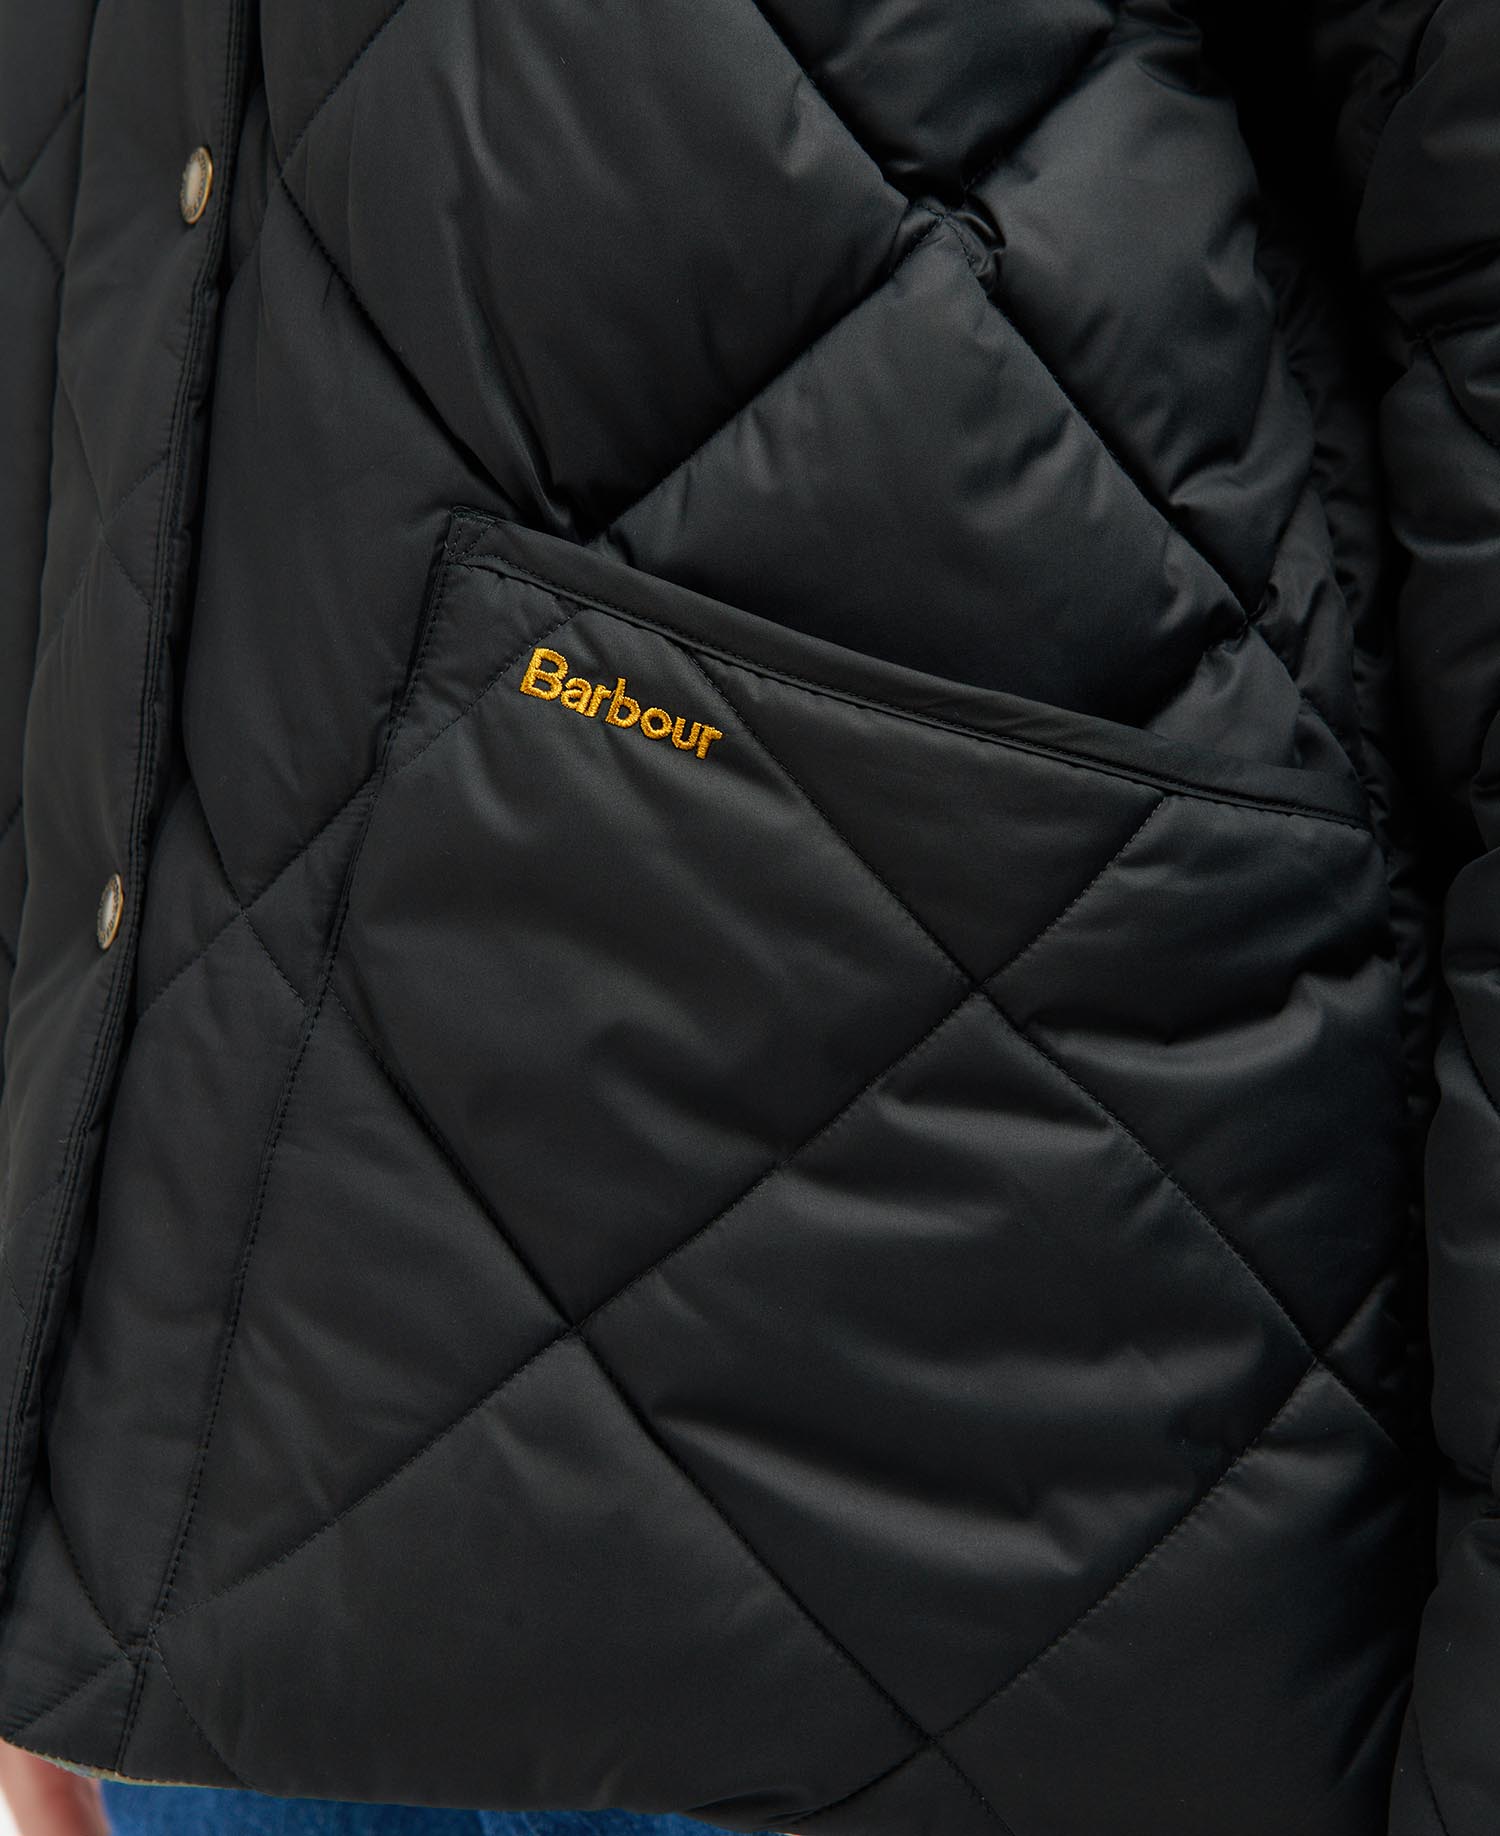 Barbour Winter Liddesdale Quilted Jacket